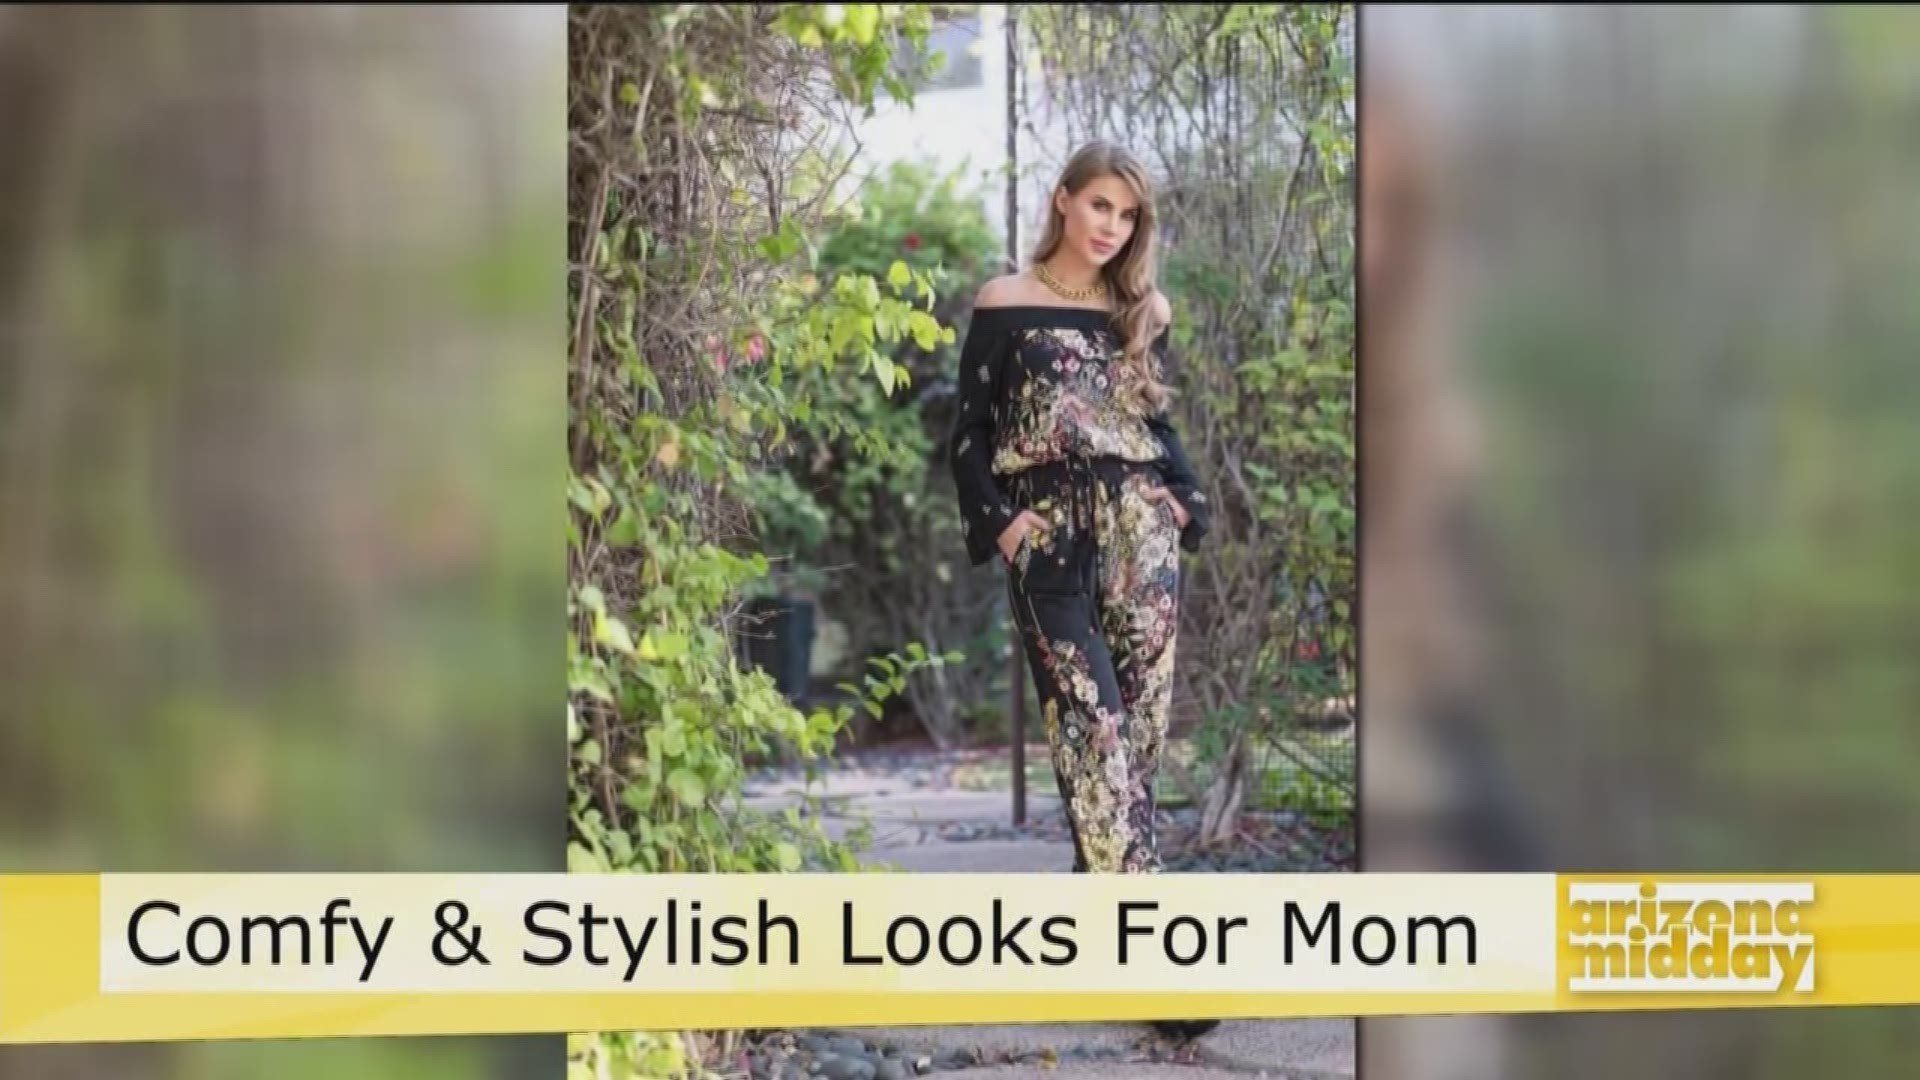 Fashion designer and cookbook author Elina Casell is showing moms how to stay stylish with a busy schedule